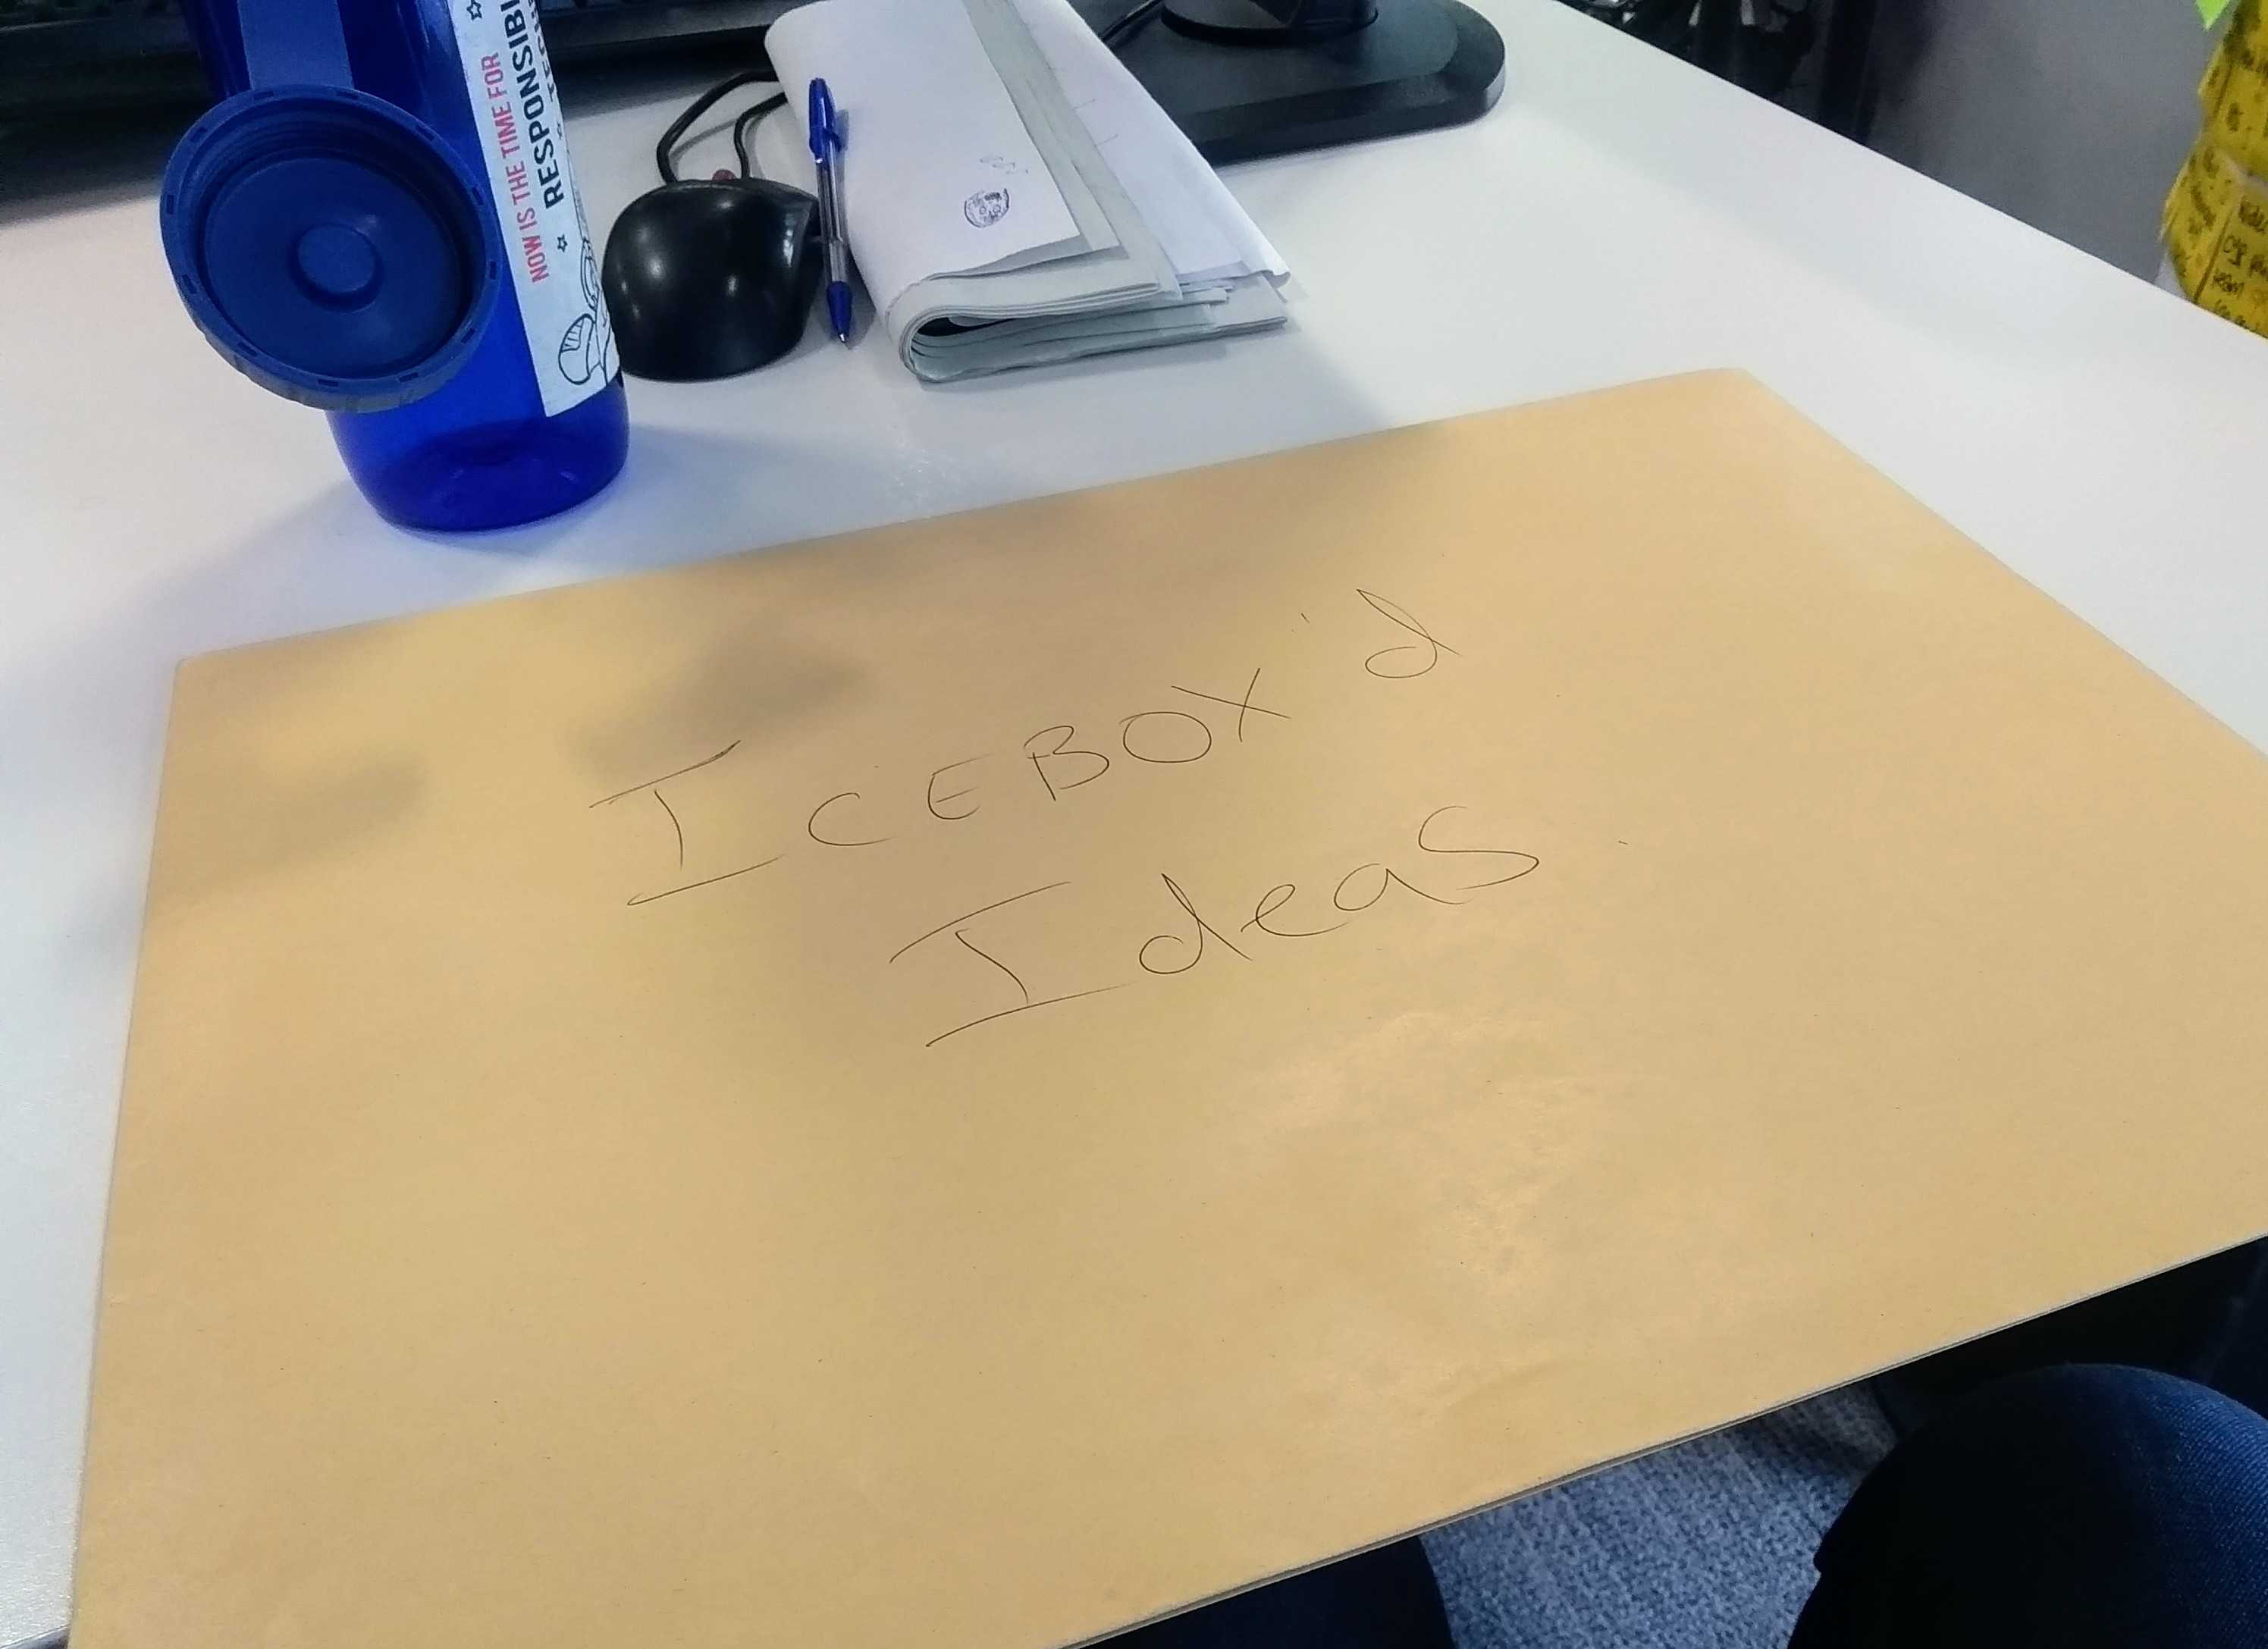 A envelope with text on it saying “icebox’d ideas” on a desk next to a water bottle